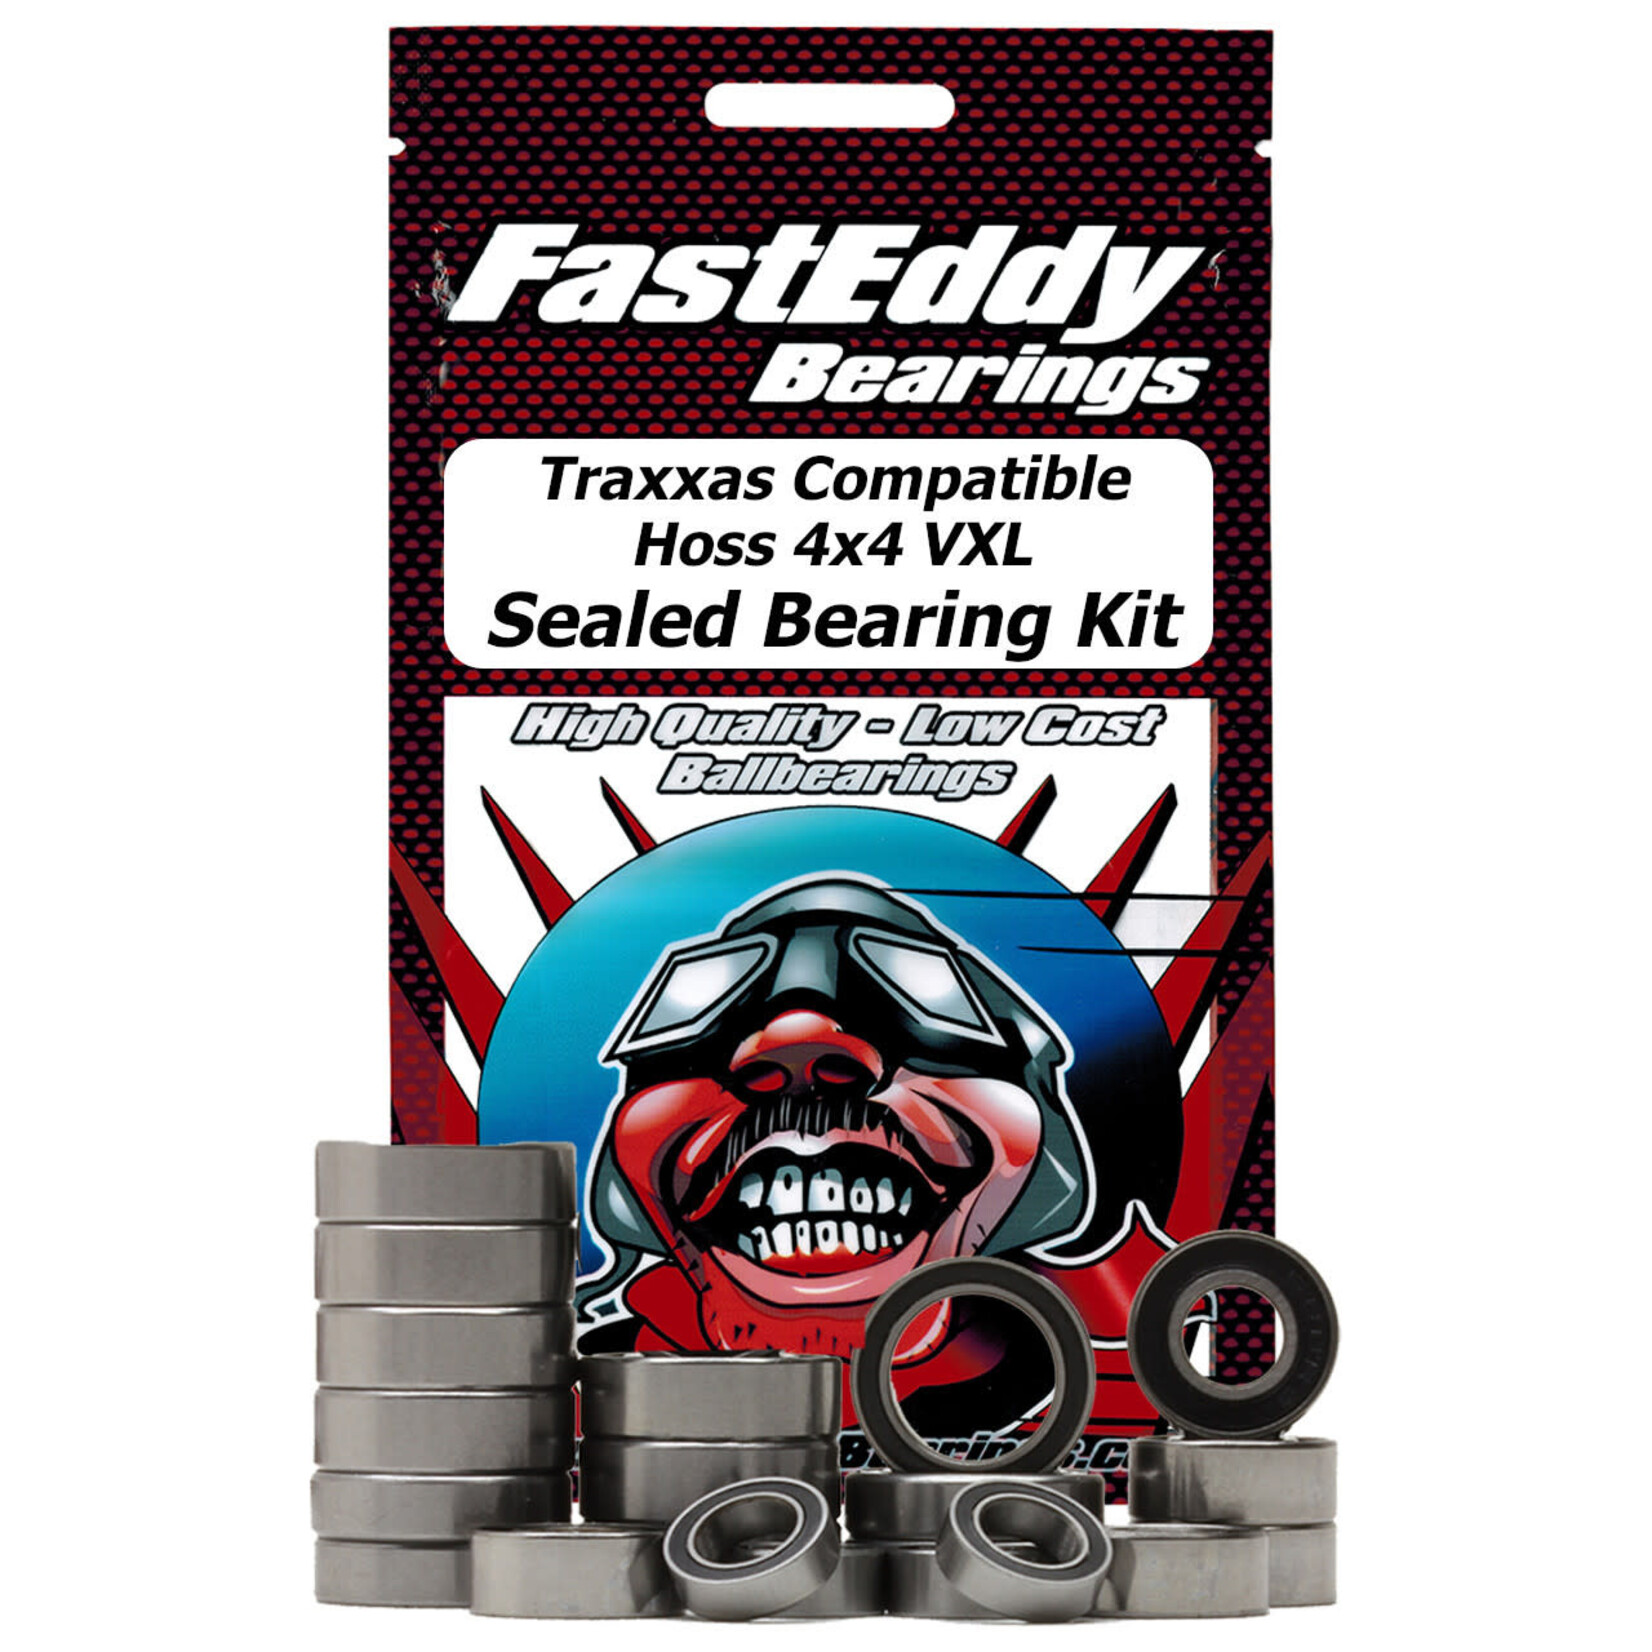 FastEddy FastEddy Traxxas Compatible Hoss 4x4 VXL Sealed Bearing Kit #TFE6289